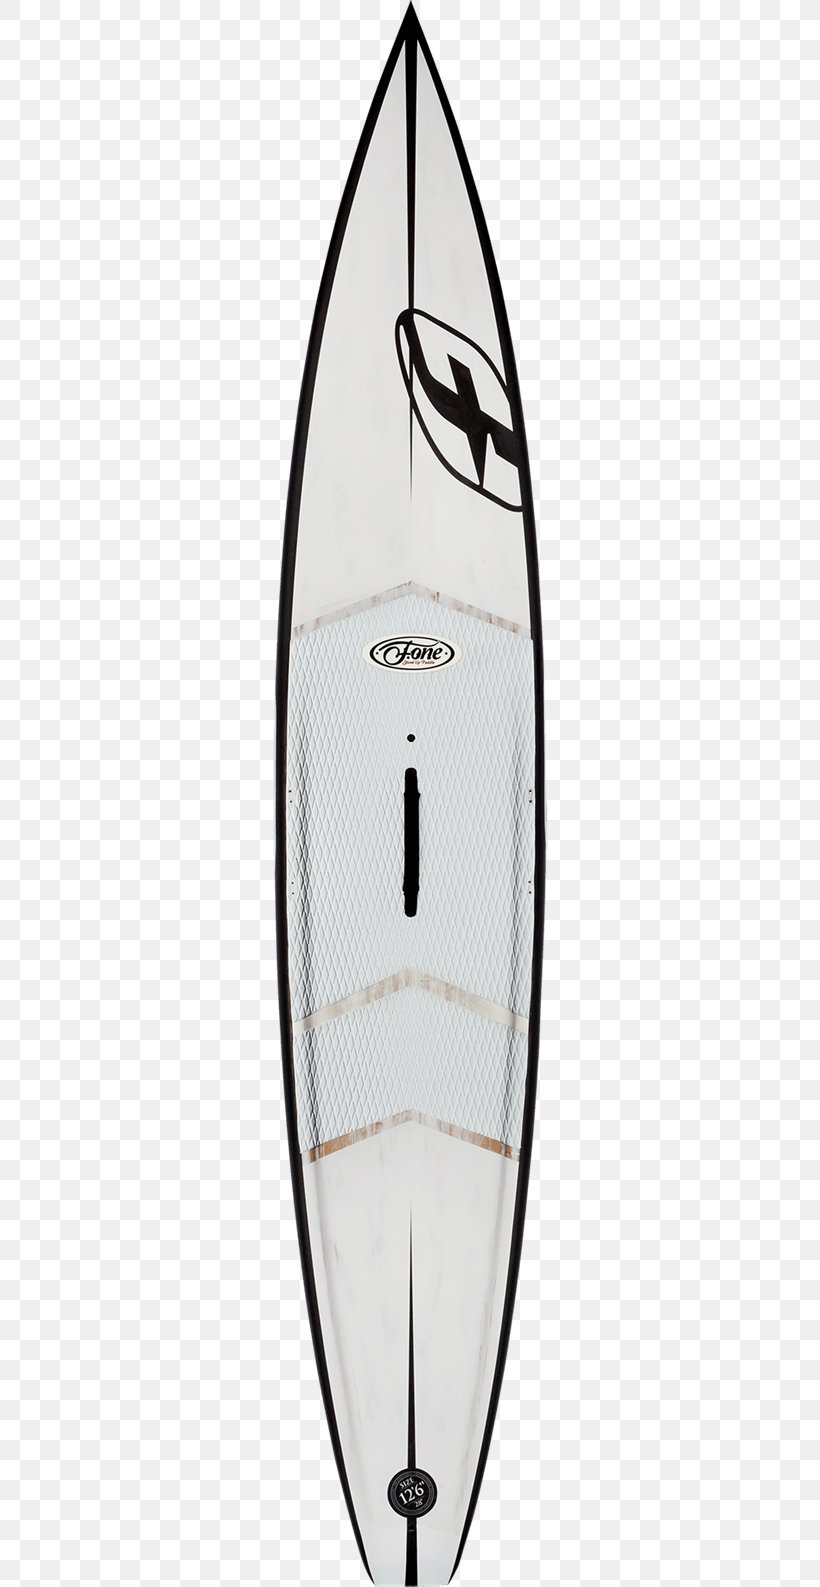 Surfboard Standup Paddleboarding Surfing 0 1, PNG, 300x1587px, 2014, 2015, 2017, Surfboard, August Download Free